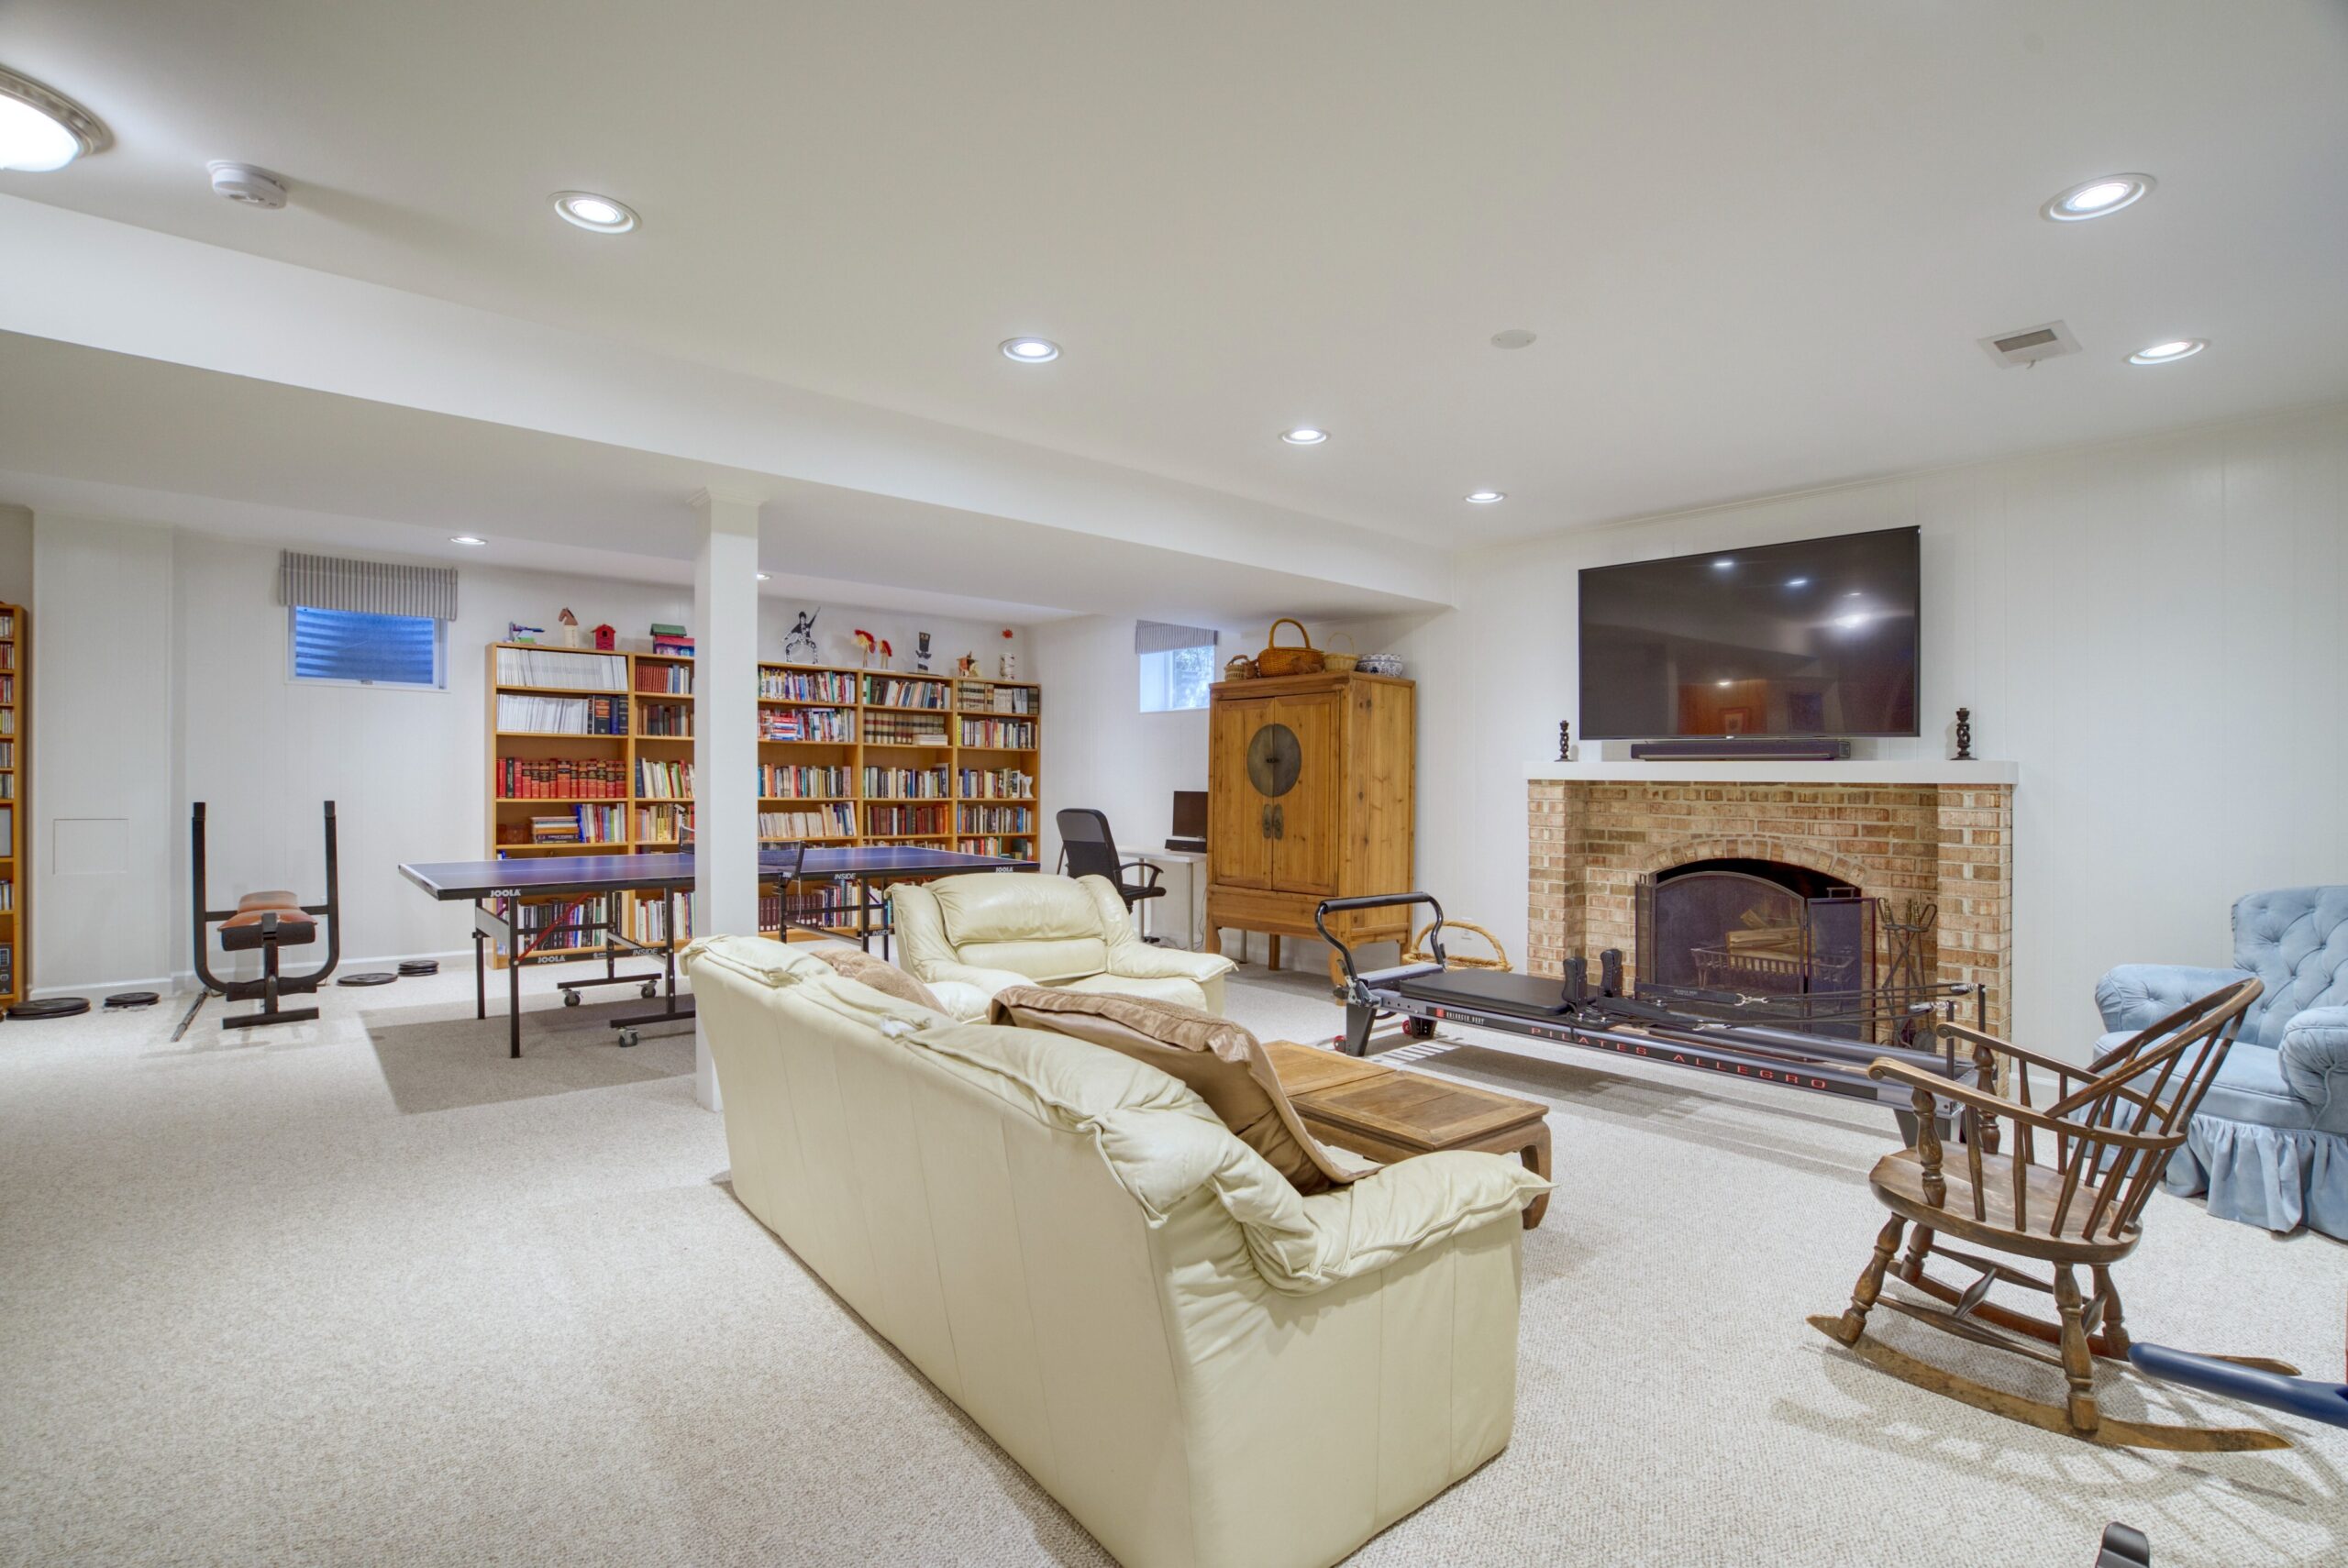 Professional interior photo of 8305 River Falls Dr, Potomac, MD - showing basement living room with fireplace